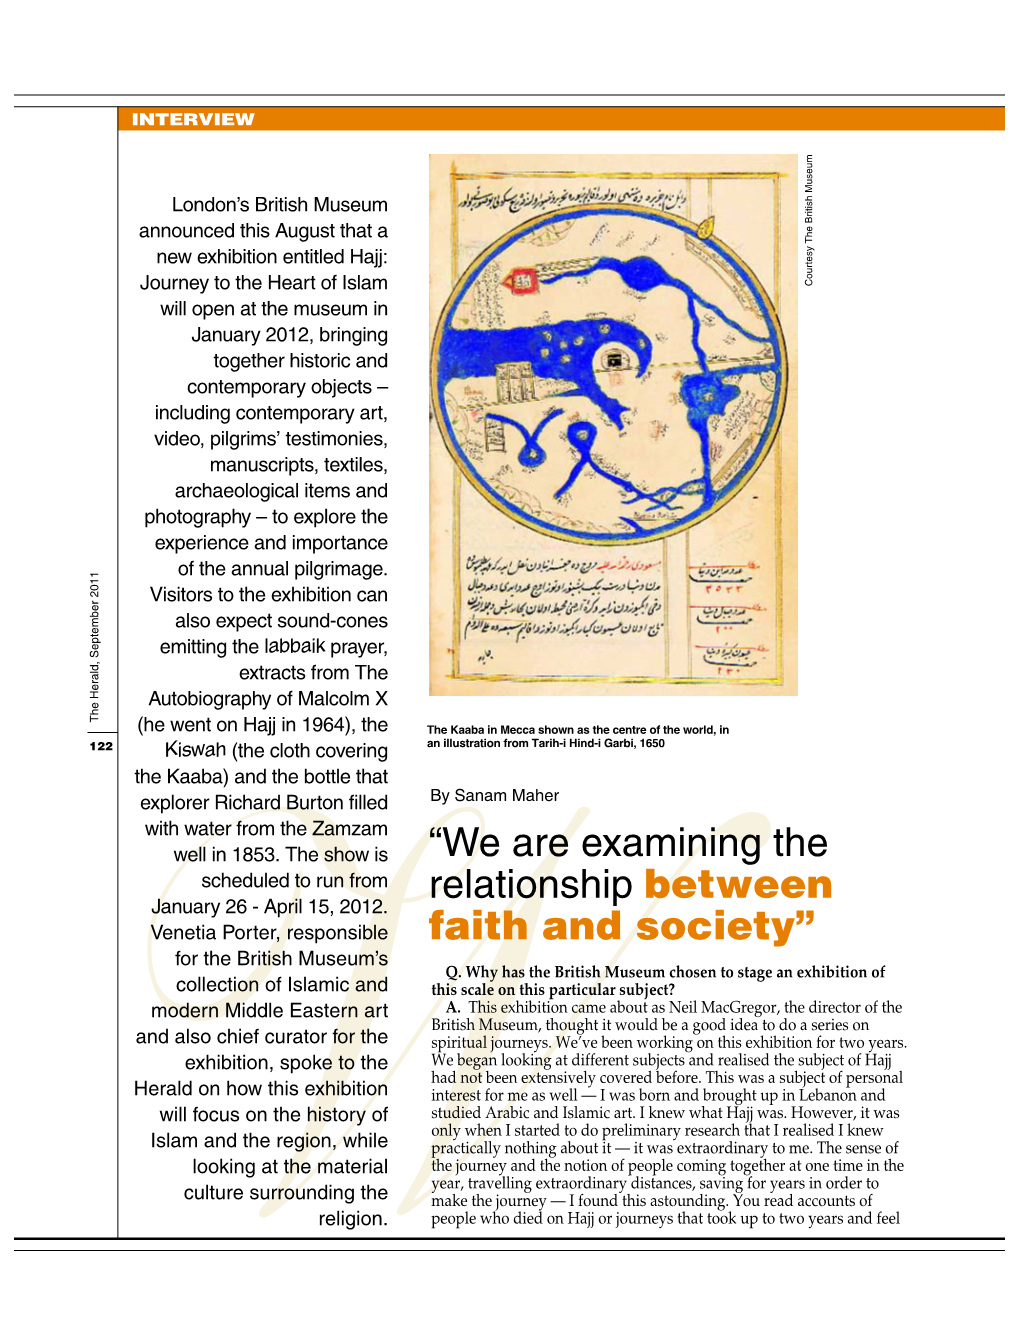 “We Are Examining the Relationship Between Faith and Society”